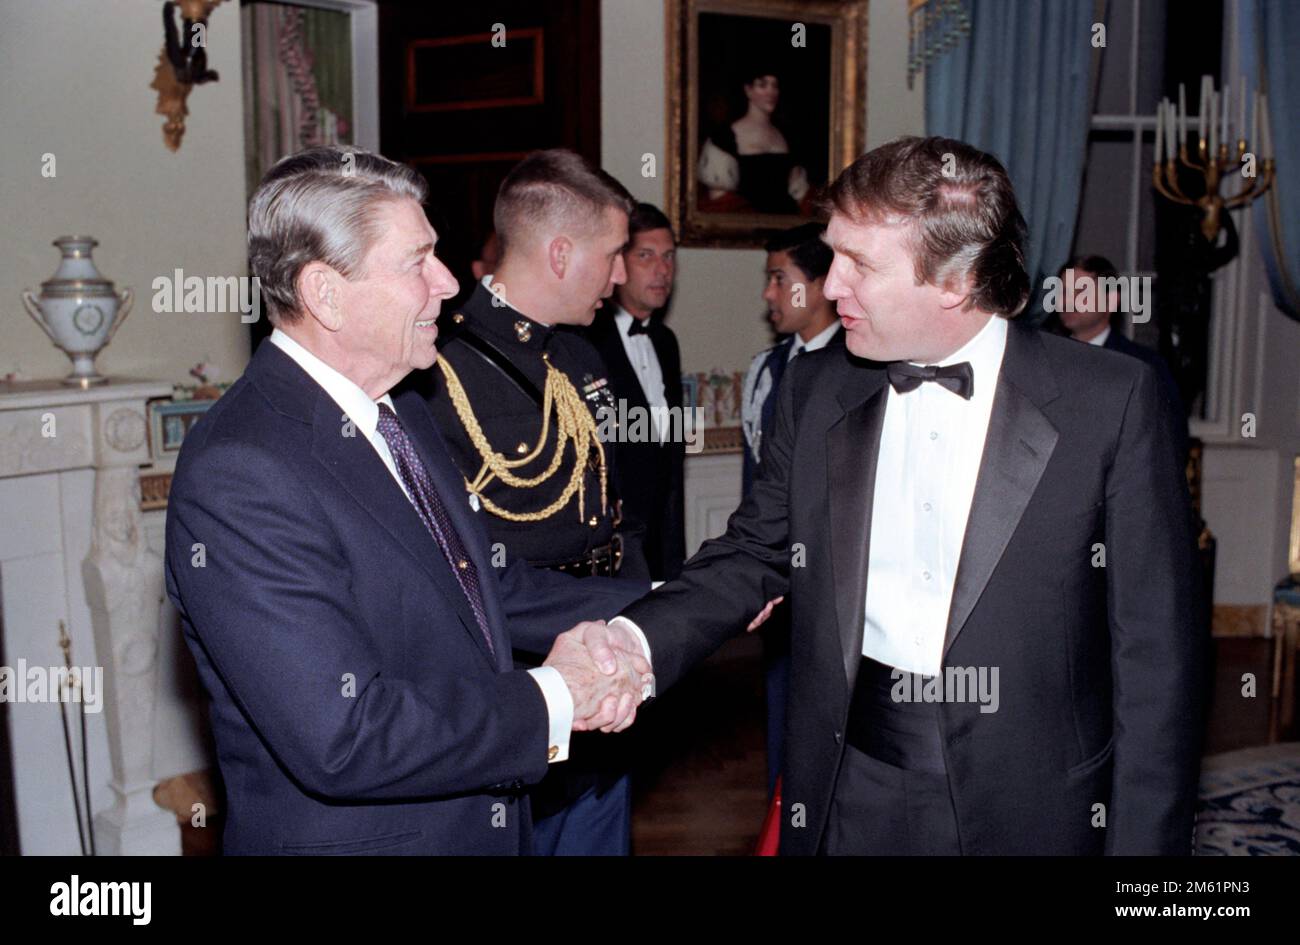 11/3/1987 President Reagan shaking hands with Donald Trump at a reception for members of the 'Friends of Art and Preservation in Embassies' Foundation in the Blue Room President Ronald Reagan shaking hands with Donald Trumpat at a Reception for Members of The 'Friends of Art and Preservation in Embassies' Foundation in The Blue Room, Nov 1987 Stock Photo